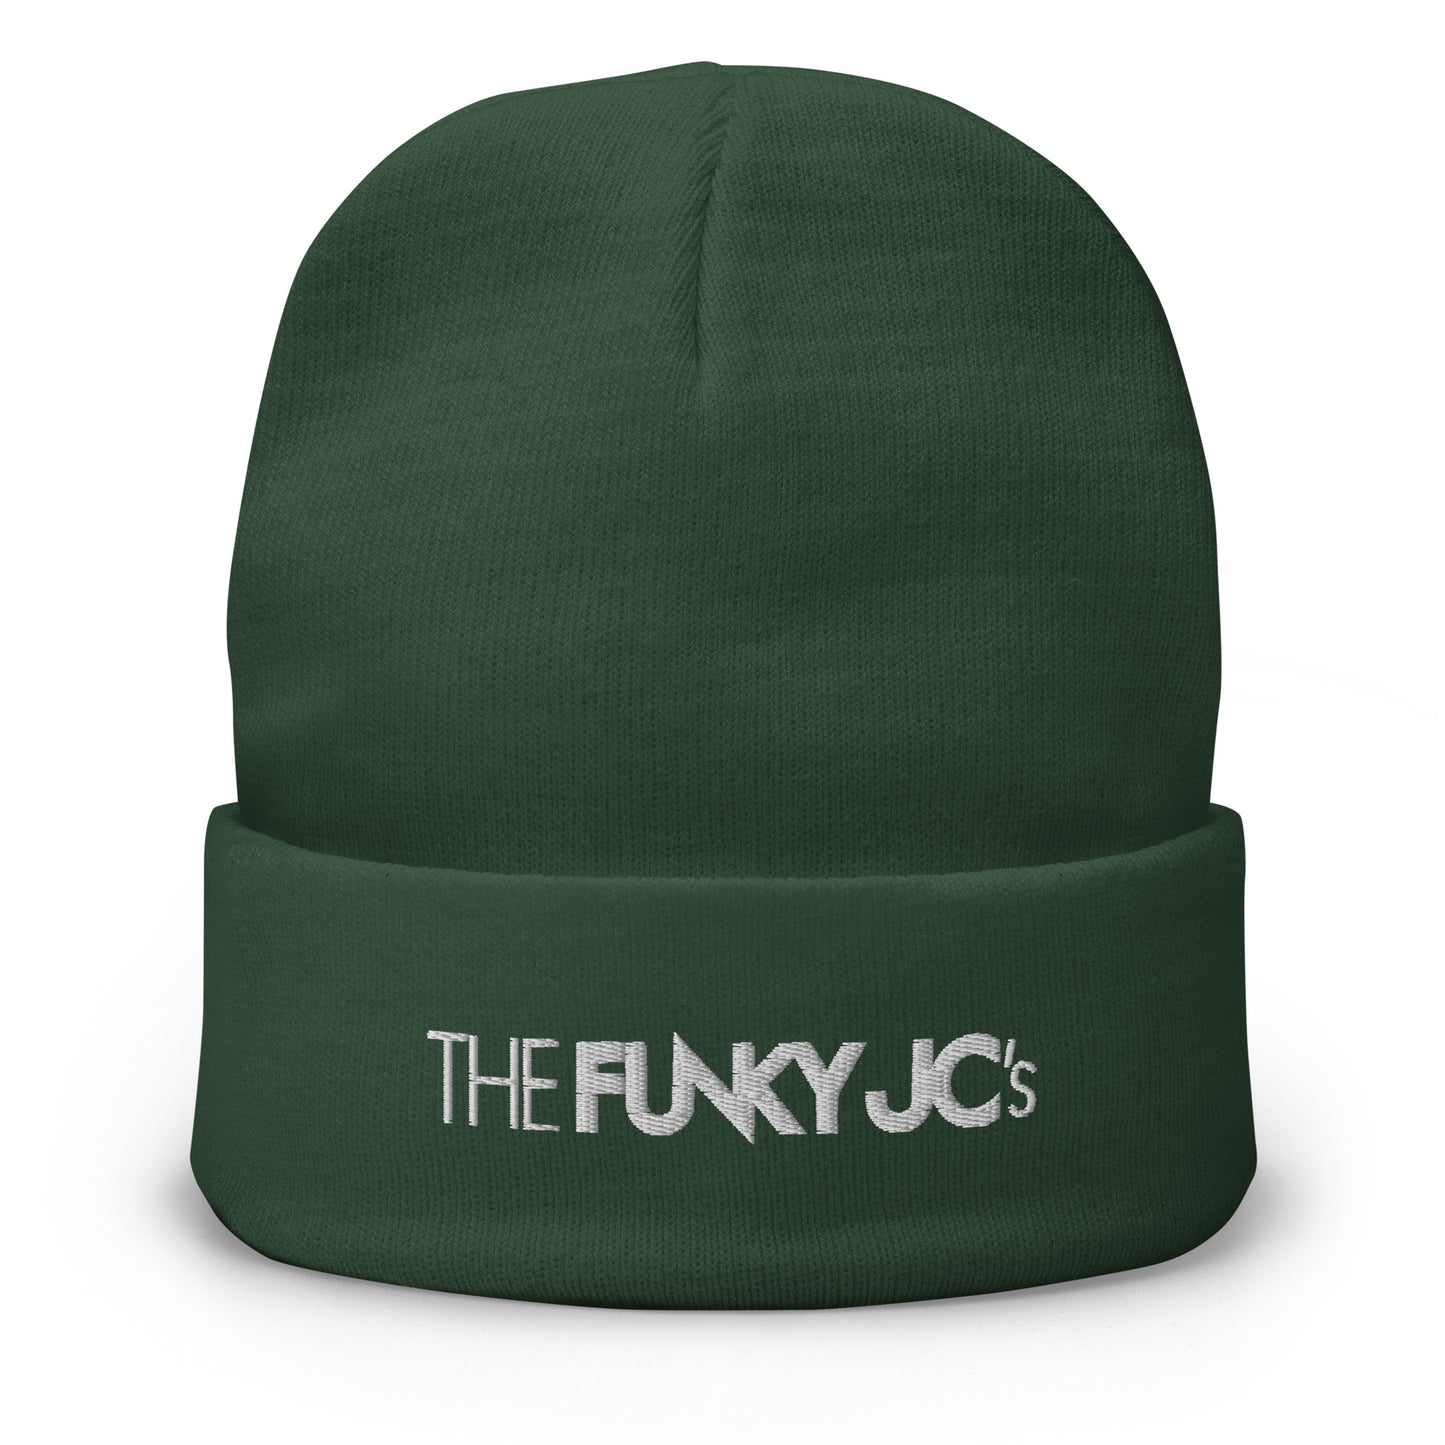 The Funky Jcs Embroidered Beanie